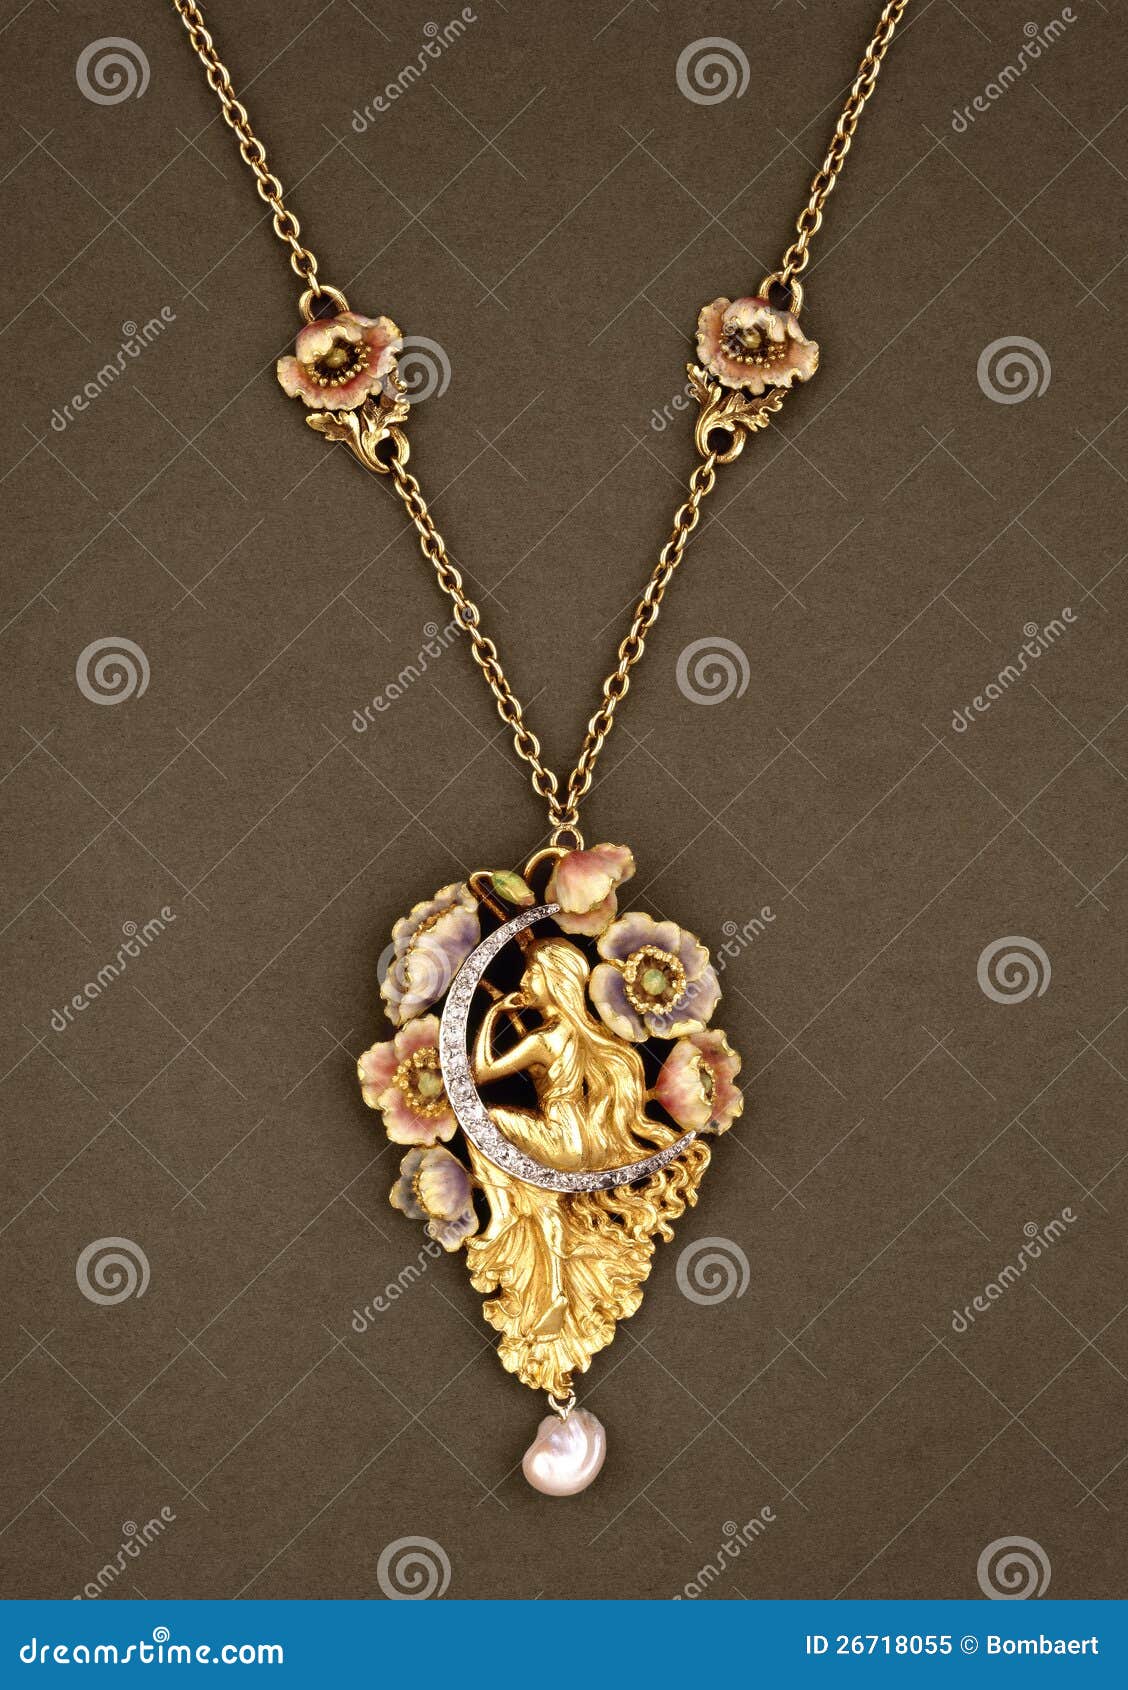 Closeup of Shiny Vintage Jewelry Stock Image - Image of sparkling ...